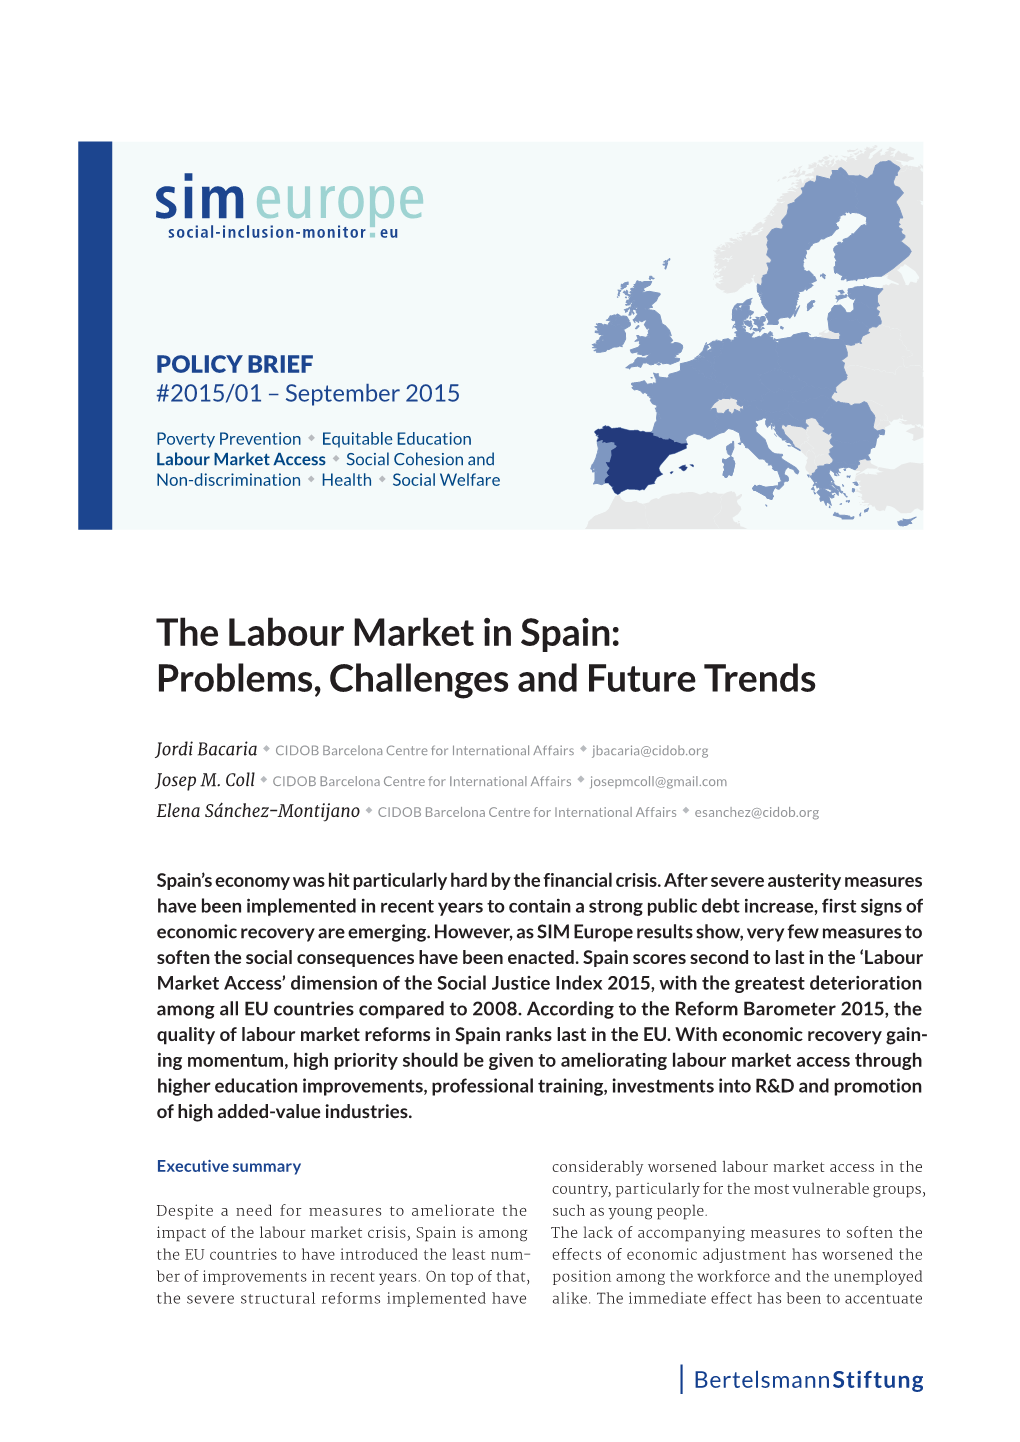 The Labour Market in Spain: Problems, Challenges and Future Trends